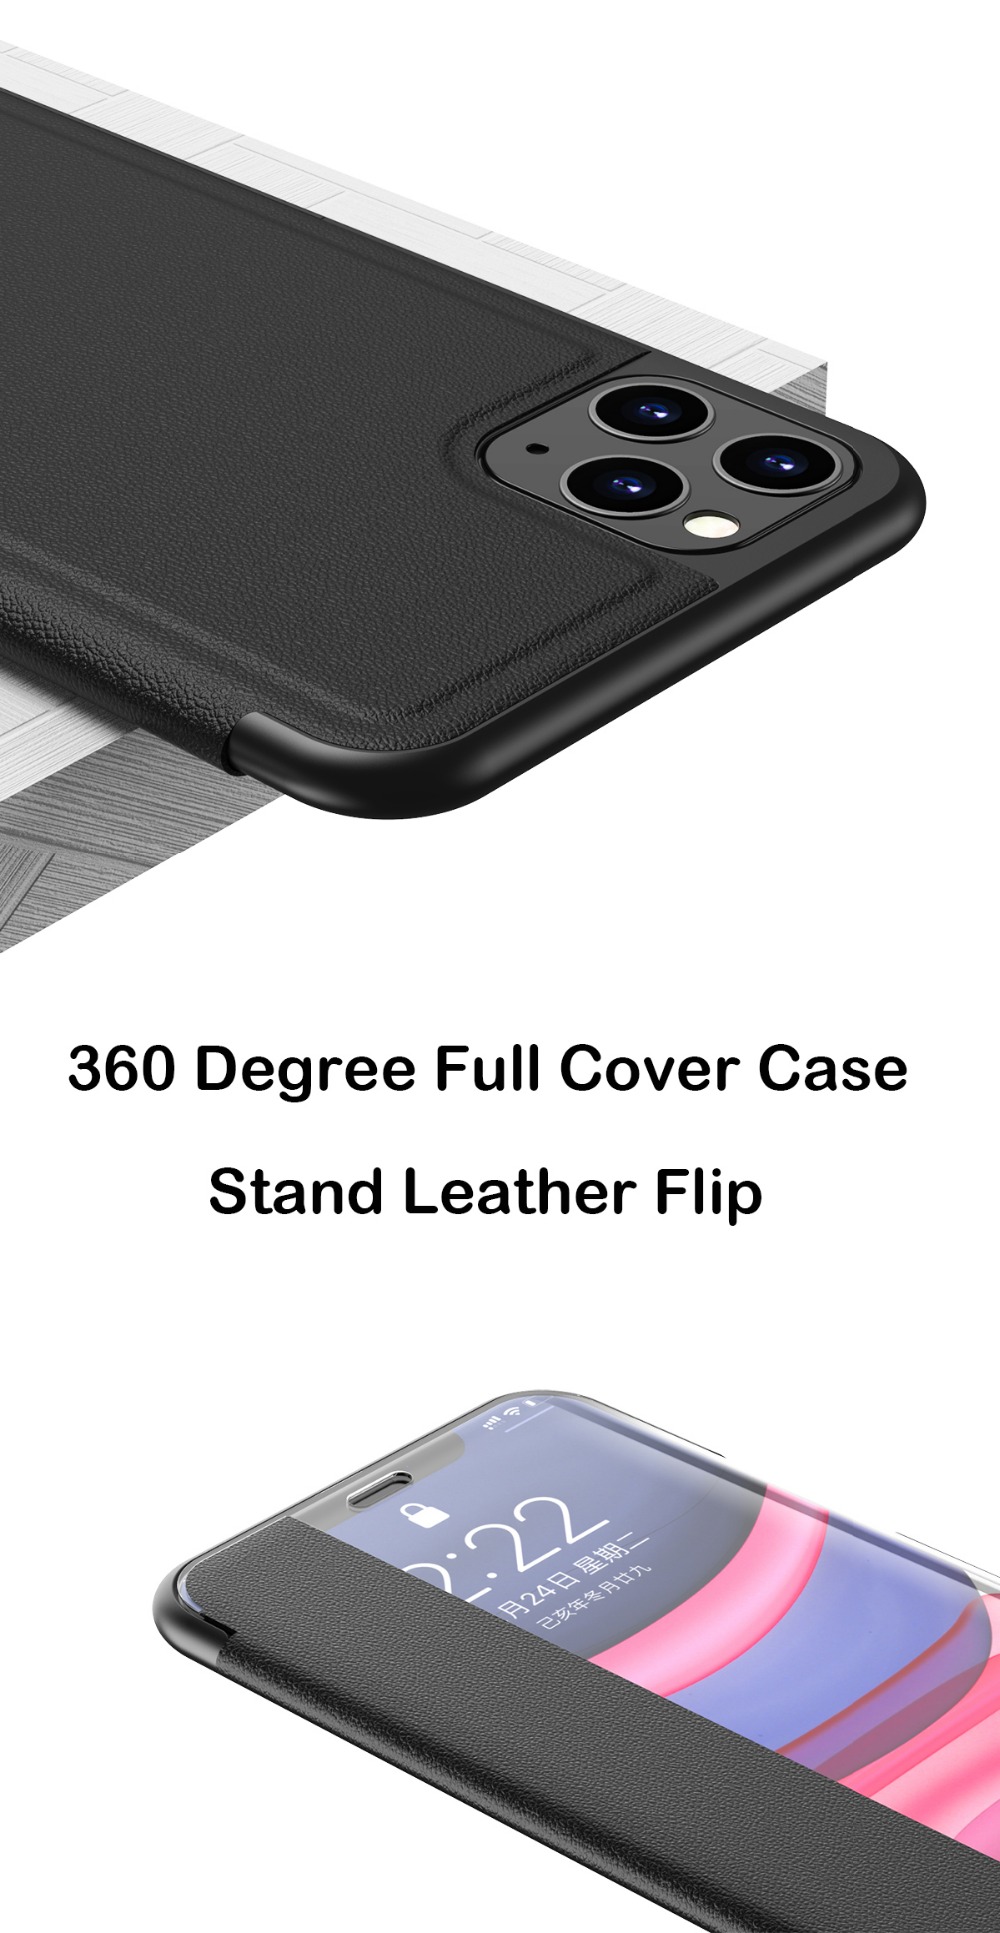 Bakeey-Flip-Bumper-Window-View-with-Foldable-Stand-PU-Leather-Protective-Case-for-iPhone-XS-Max-1630900-7